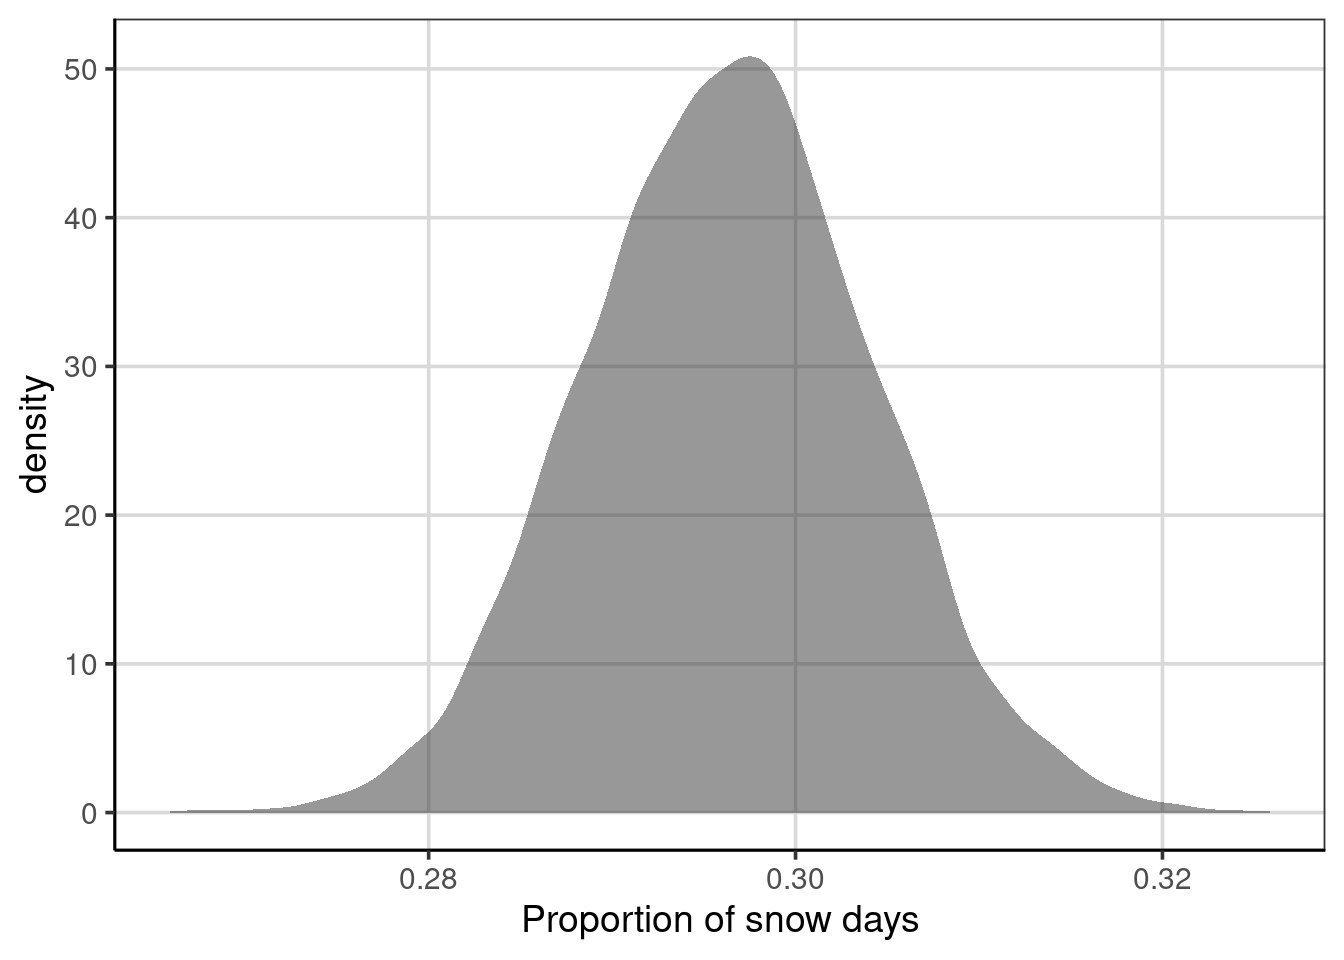 Density figure of the distribution of the proportion of days in which is snows from the resampled data.